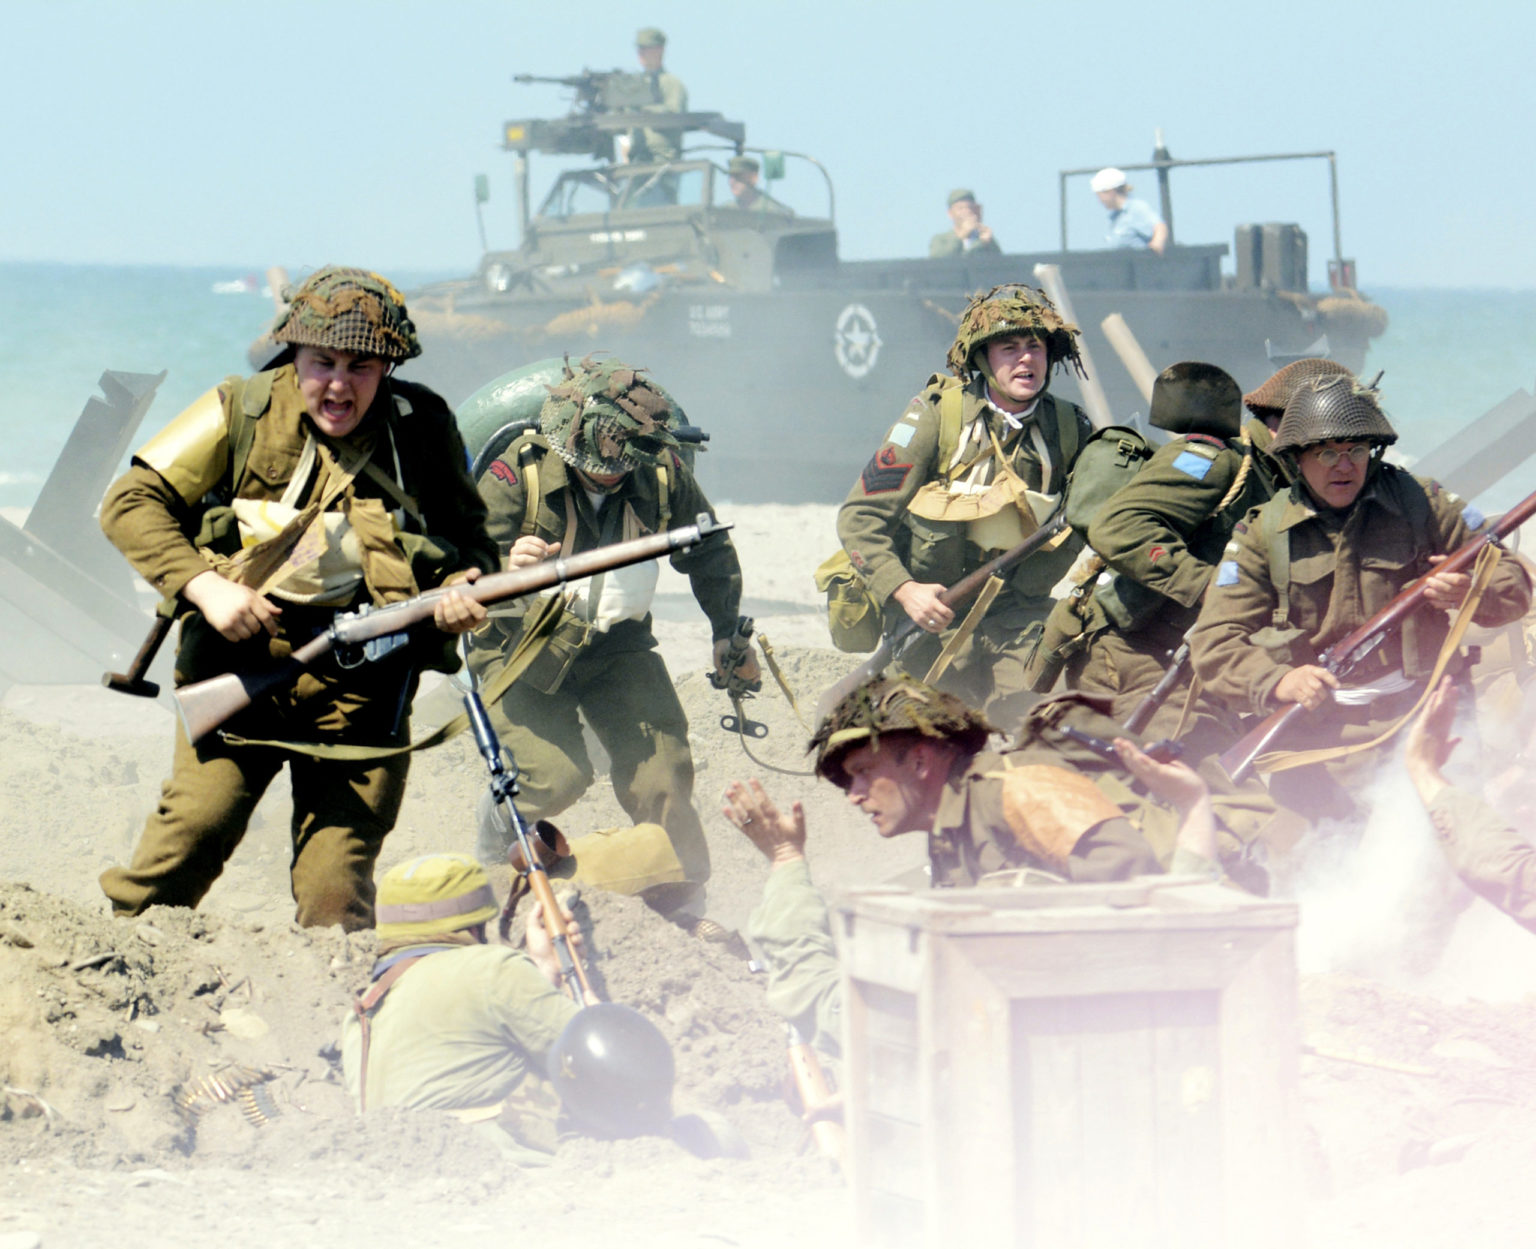 The World's Largest DDay Reenactment Is Happening This Week — in Ohio